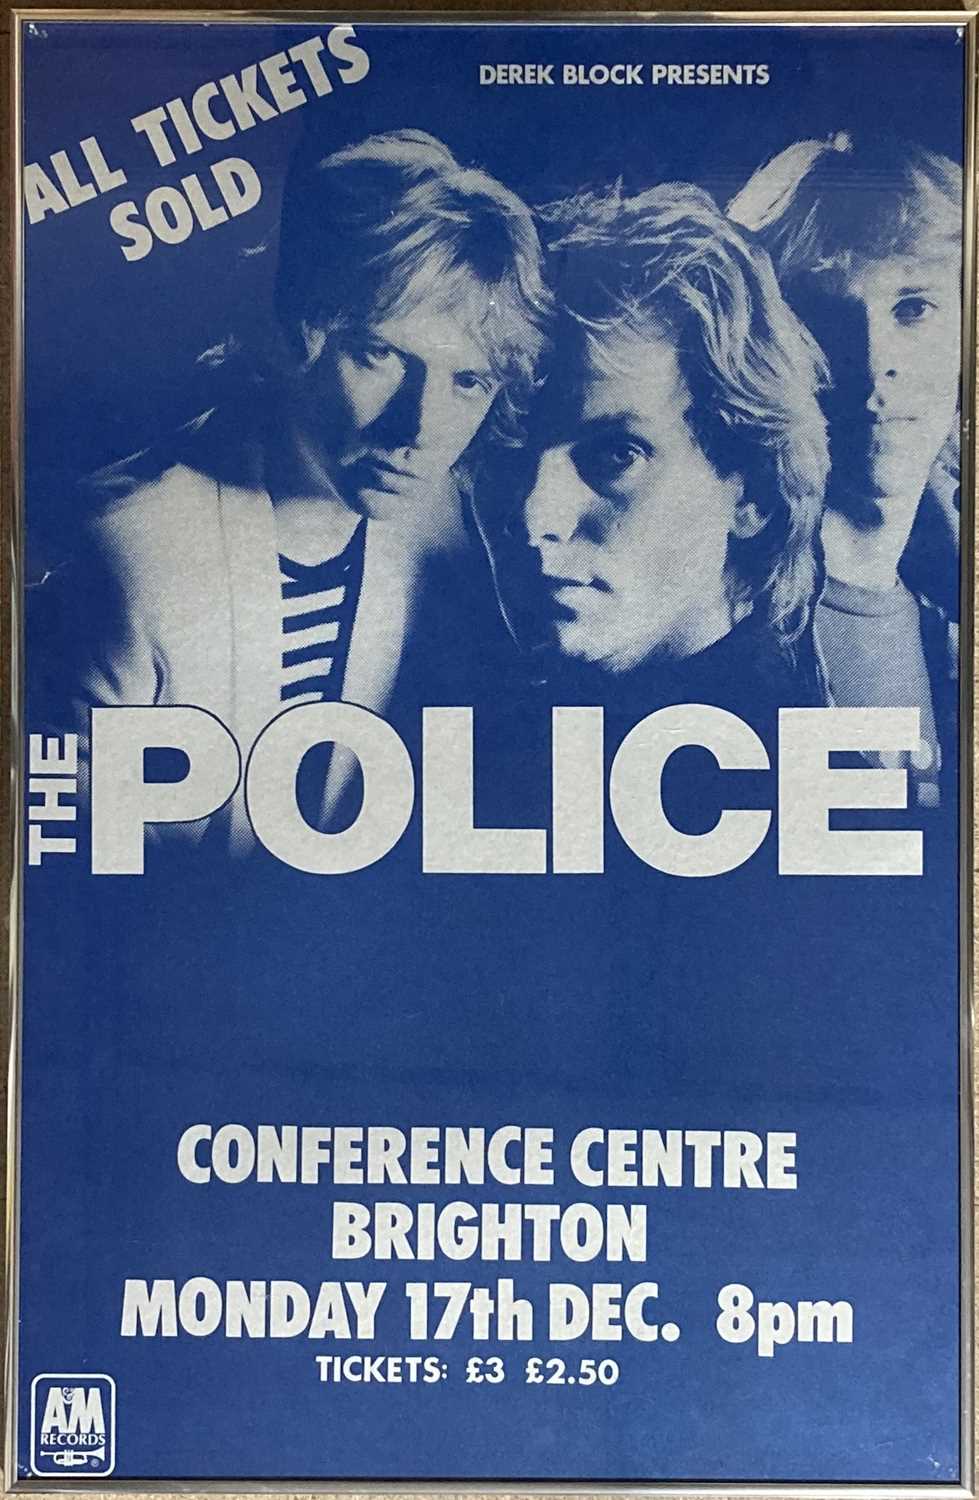 Lot 322 THE POLICE 1979 CONCERT POSTER.